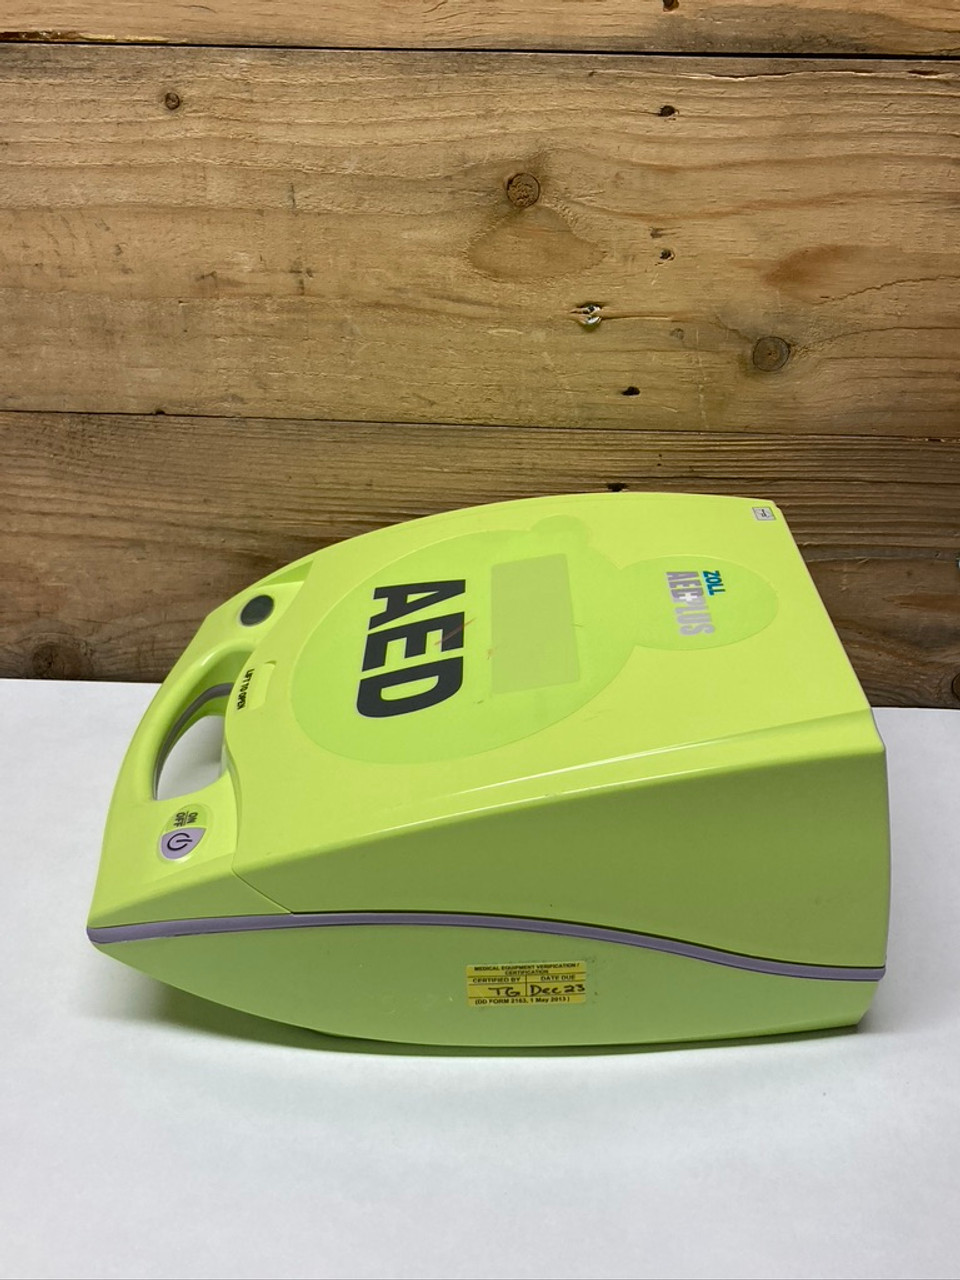 Zoll AED Plus Fully Automatic Defibrillator